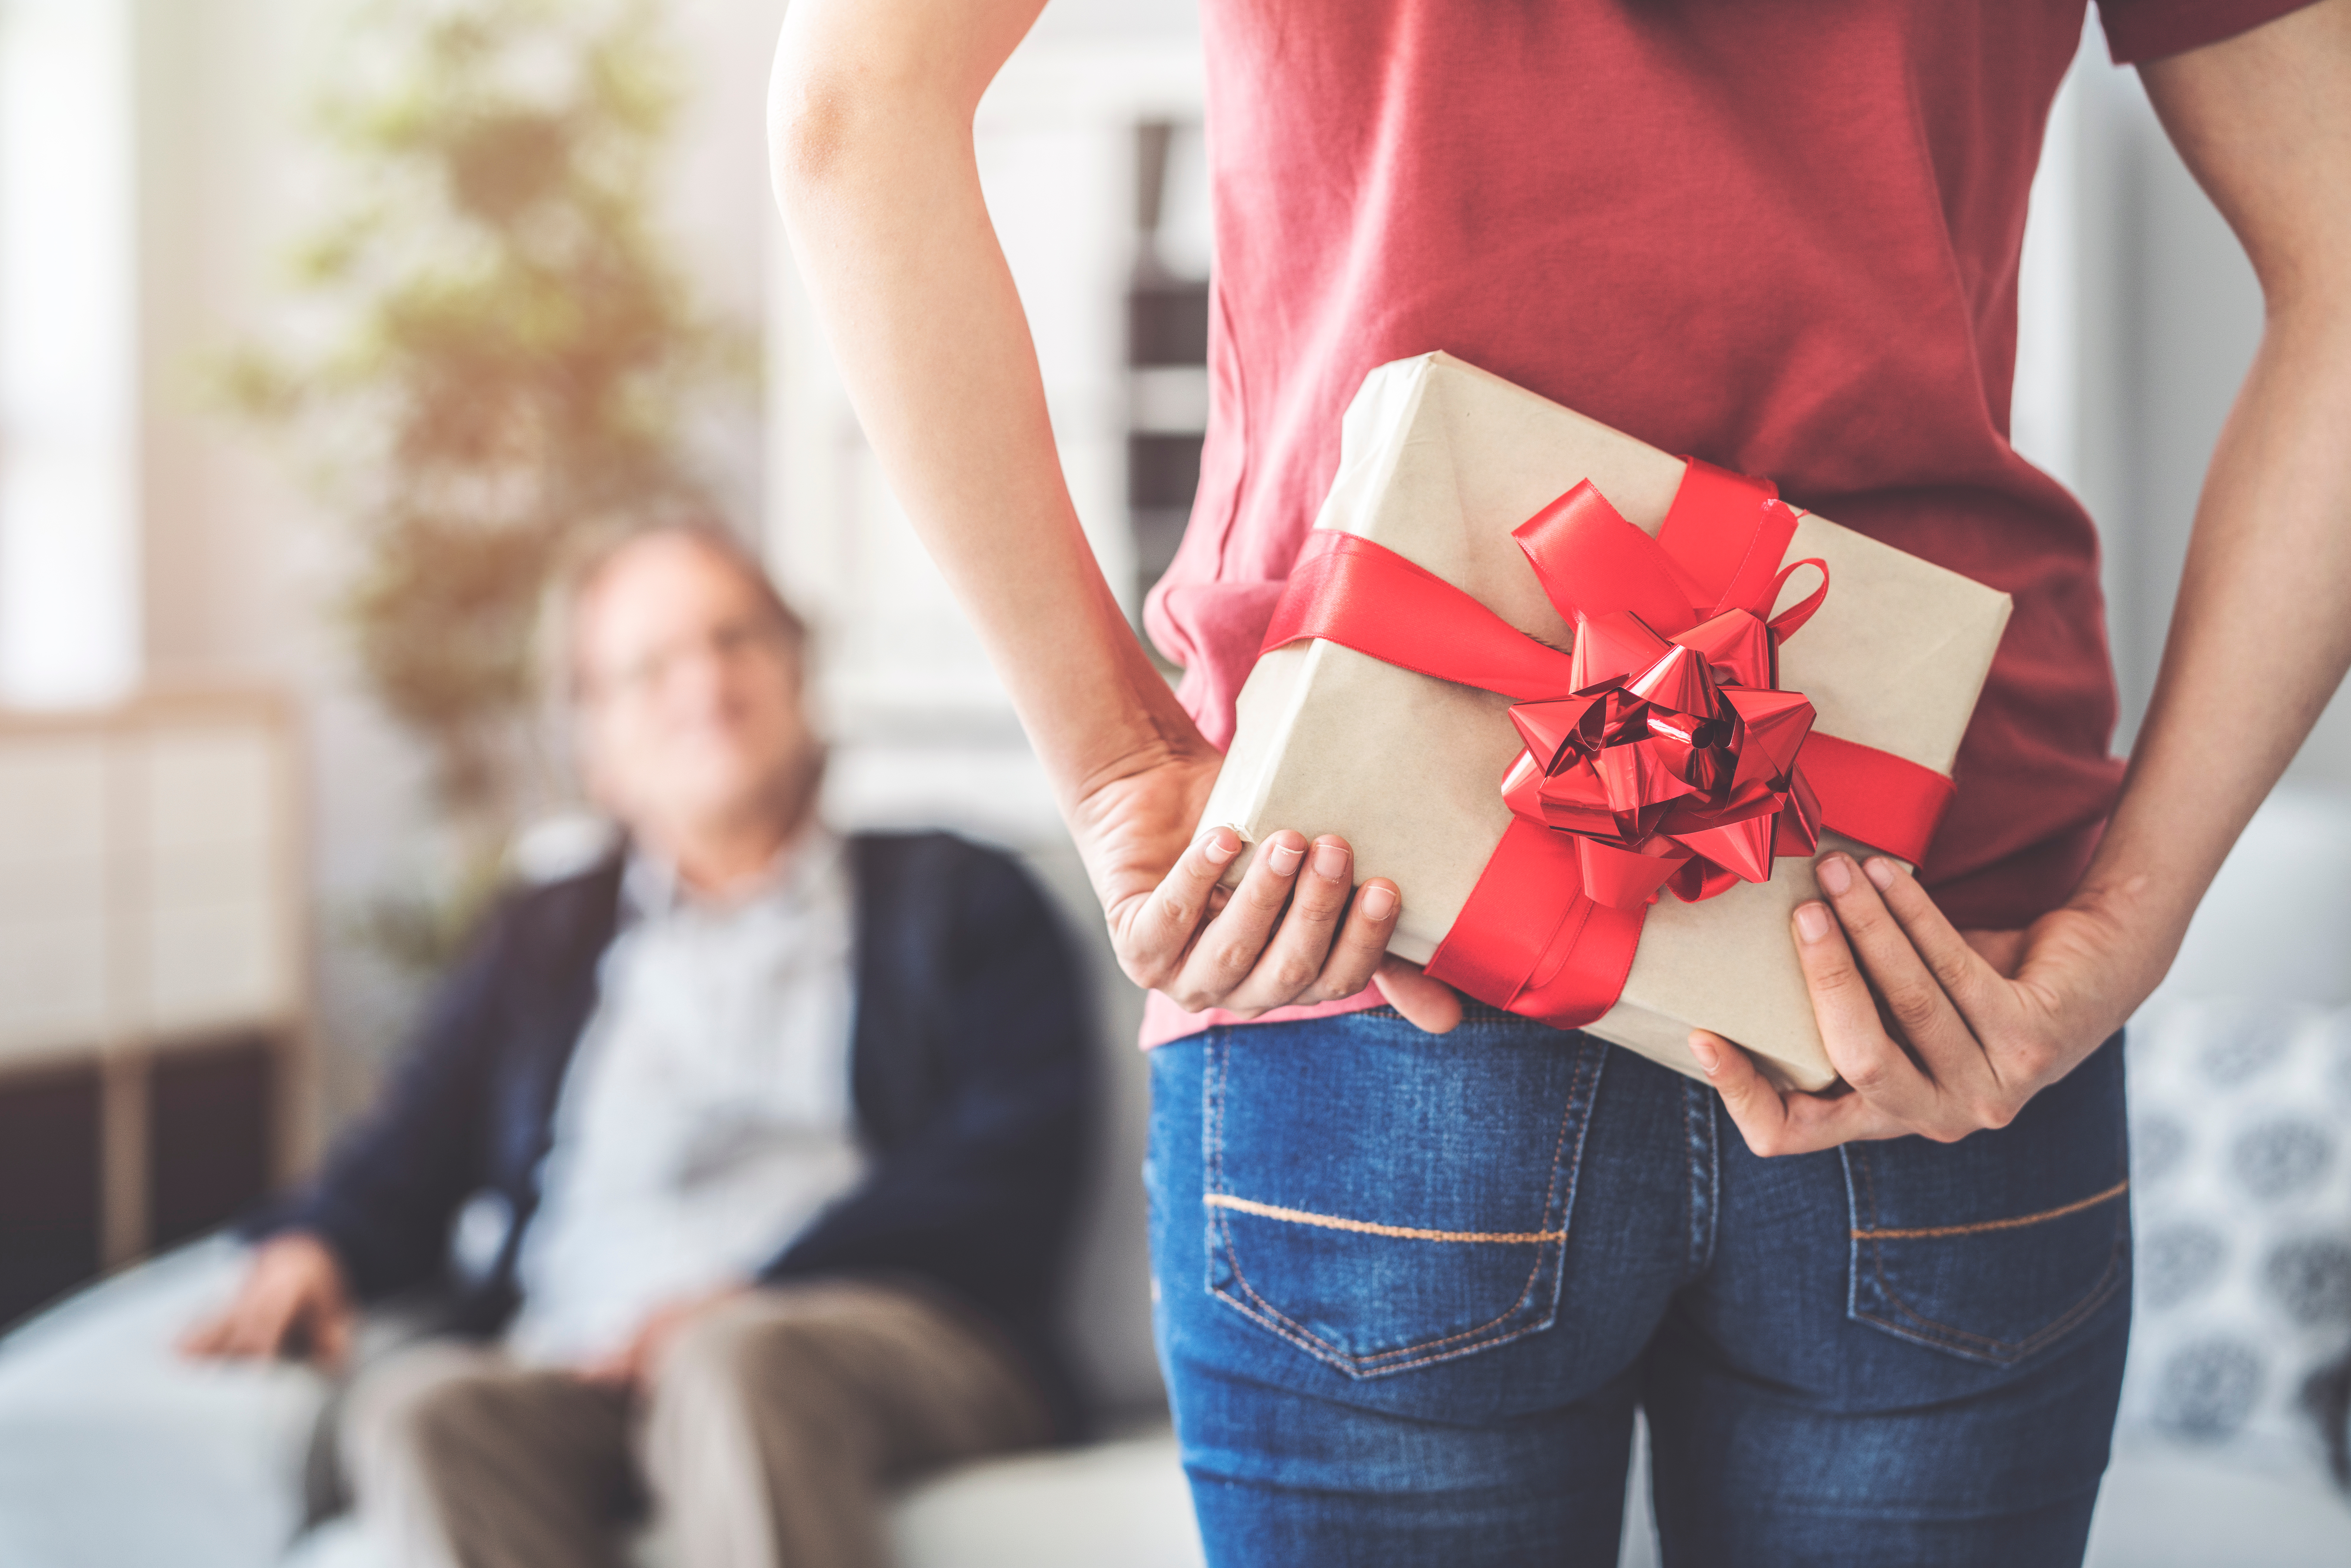 Why gift giving by patients is an ethical conundrum.